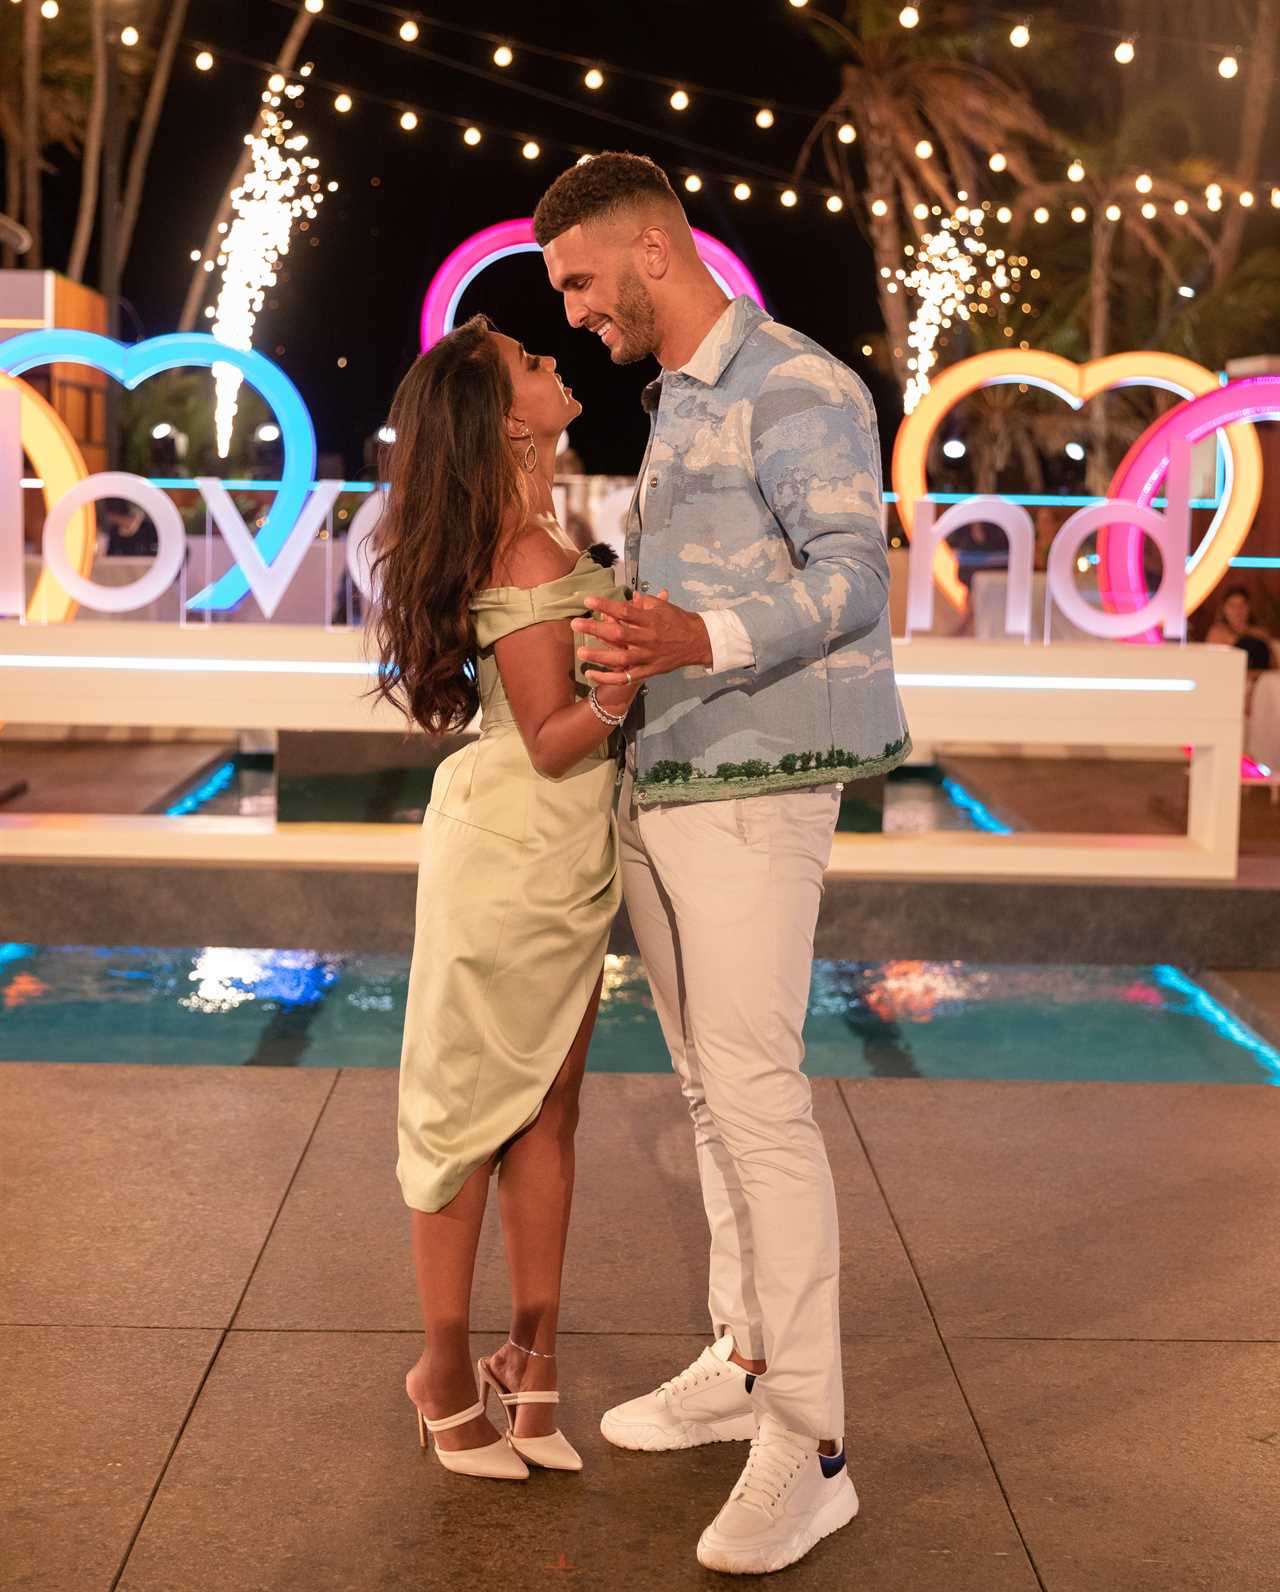 Inside Love Island winners Sanam and Kai’s huge welcome home party as loved-up pair celebrate £50k win